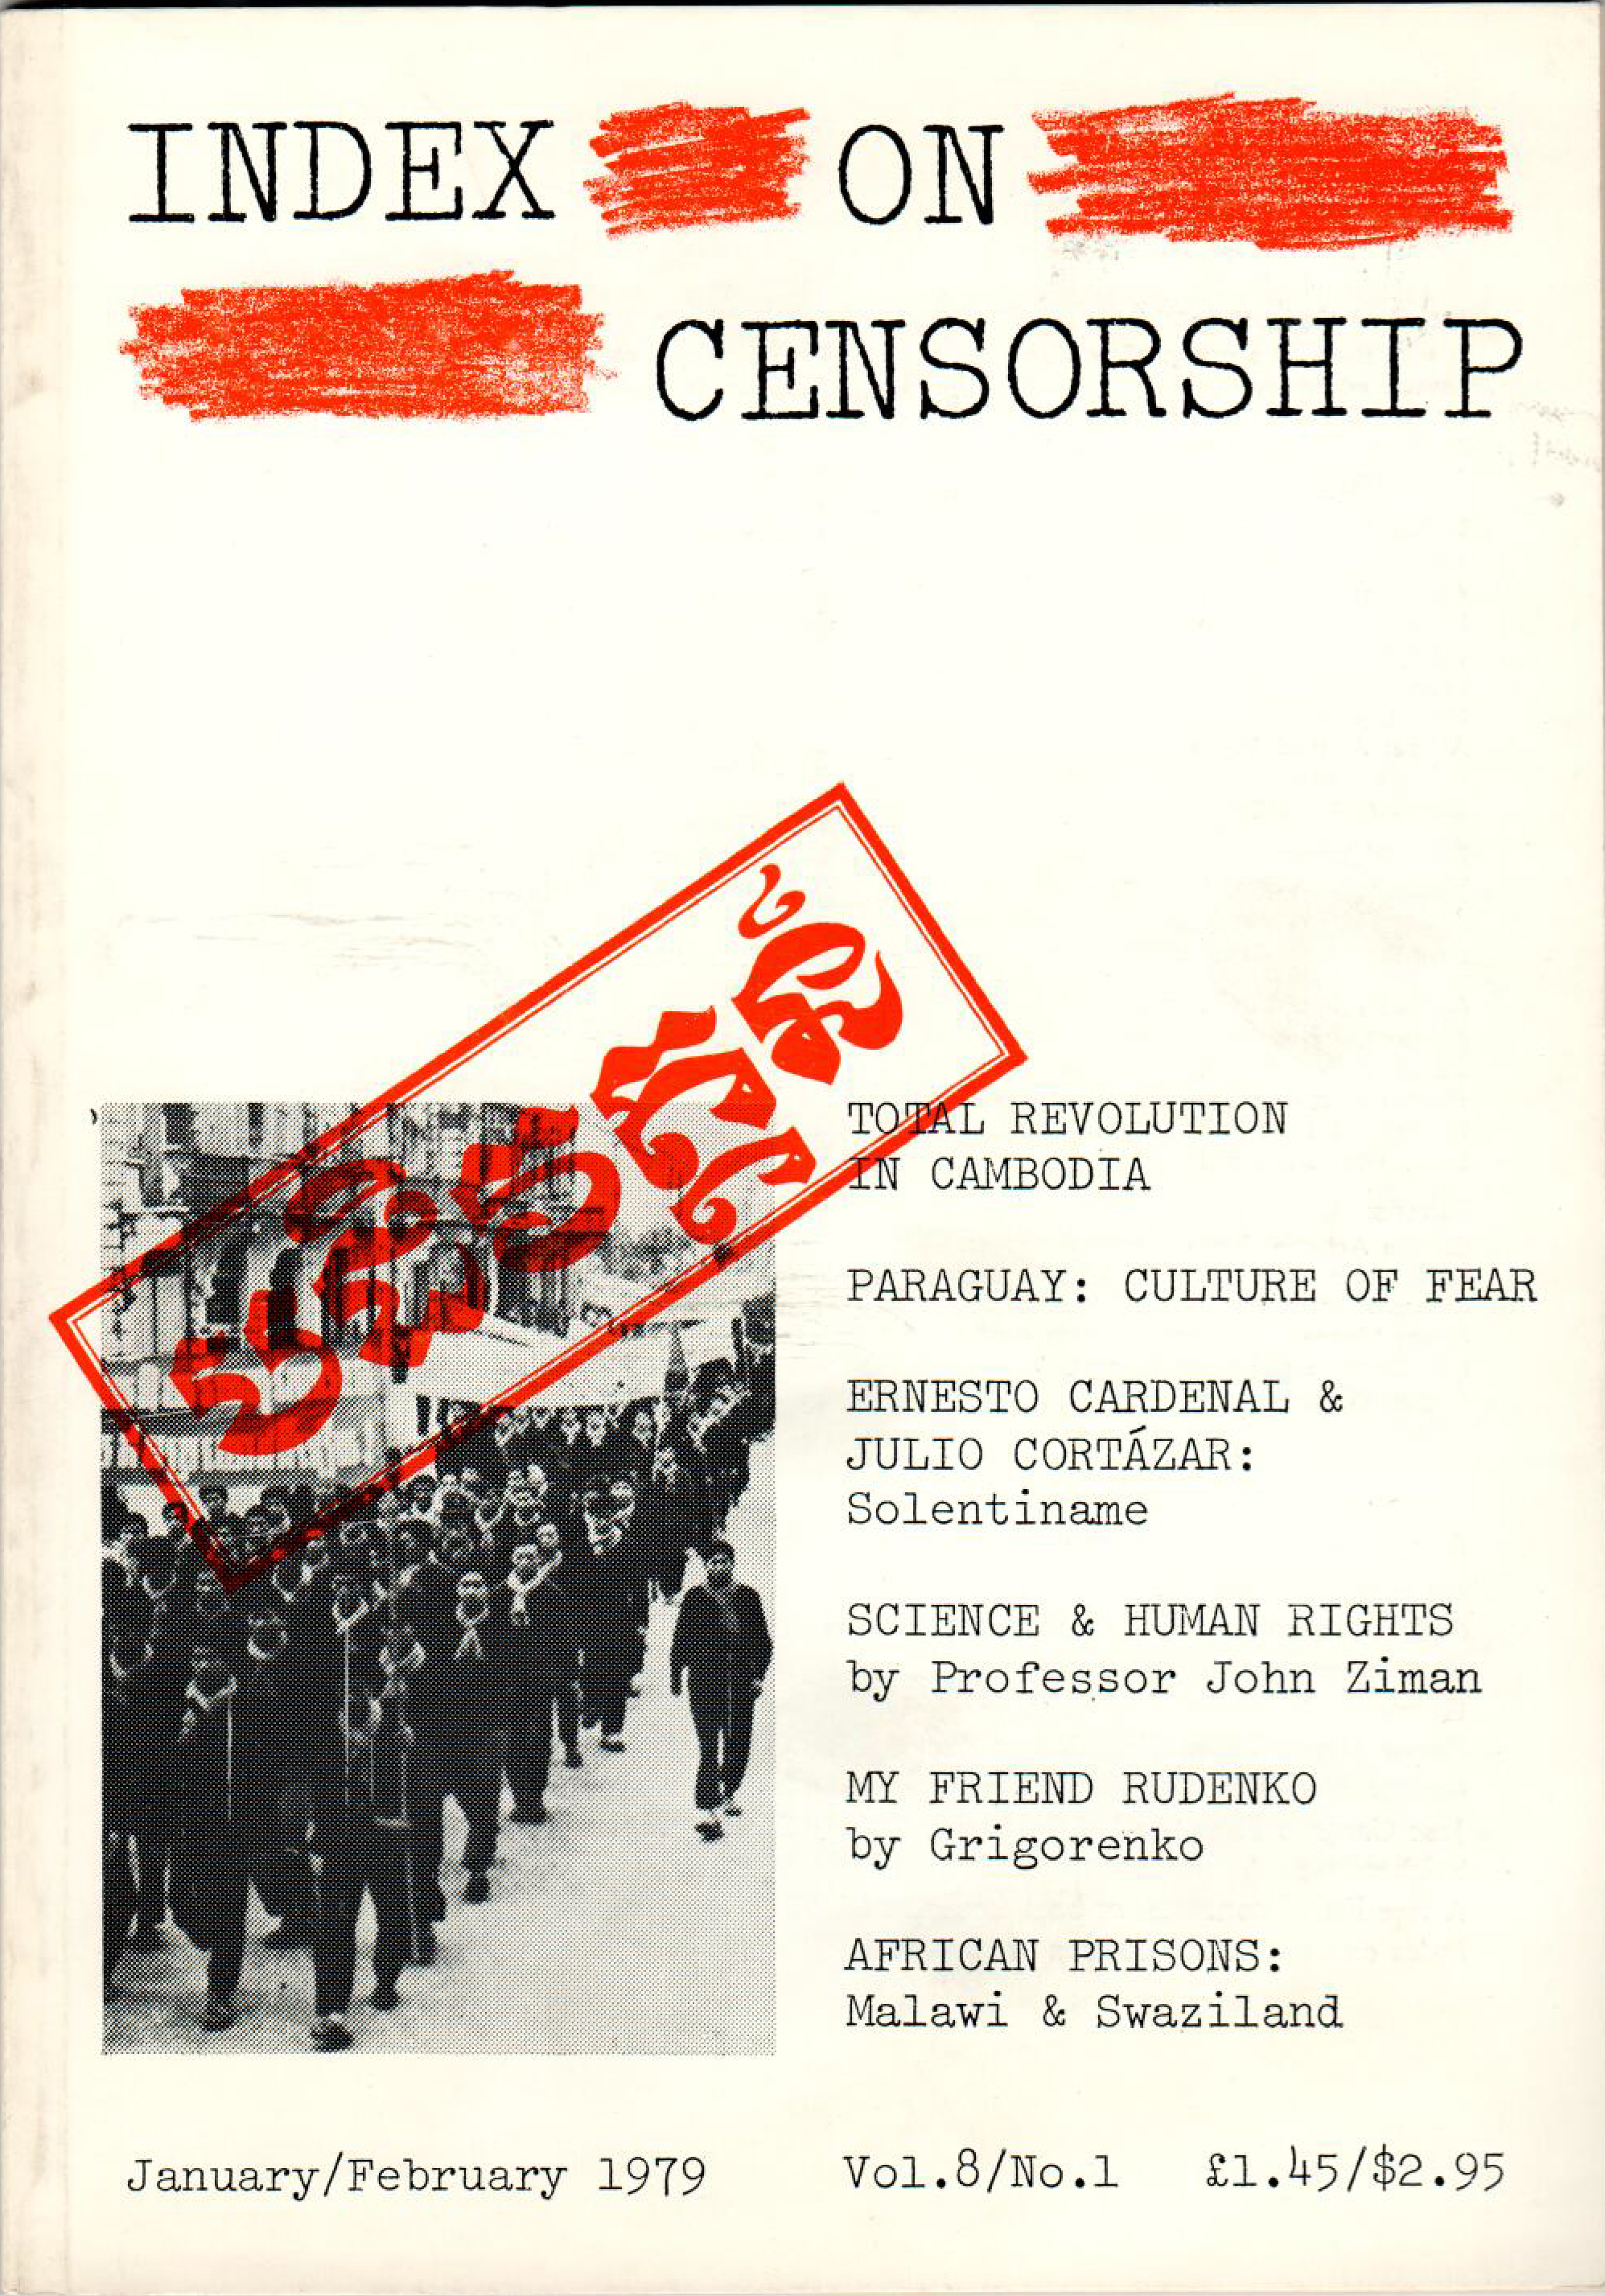 Total revolution in Cambodia, the January 1979 issue of Index on Censorship magazine